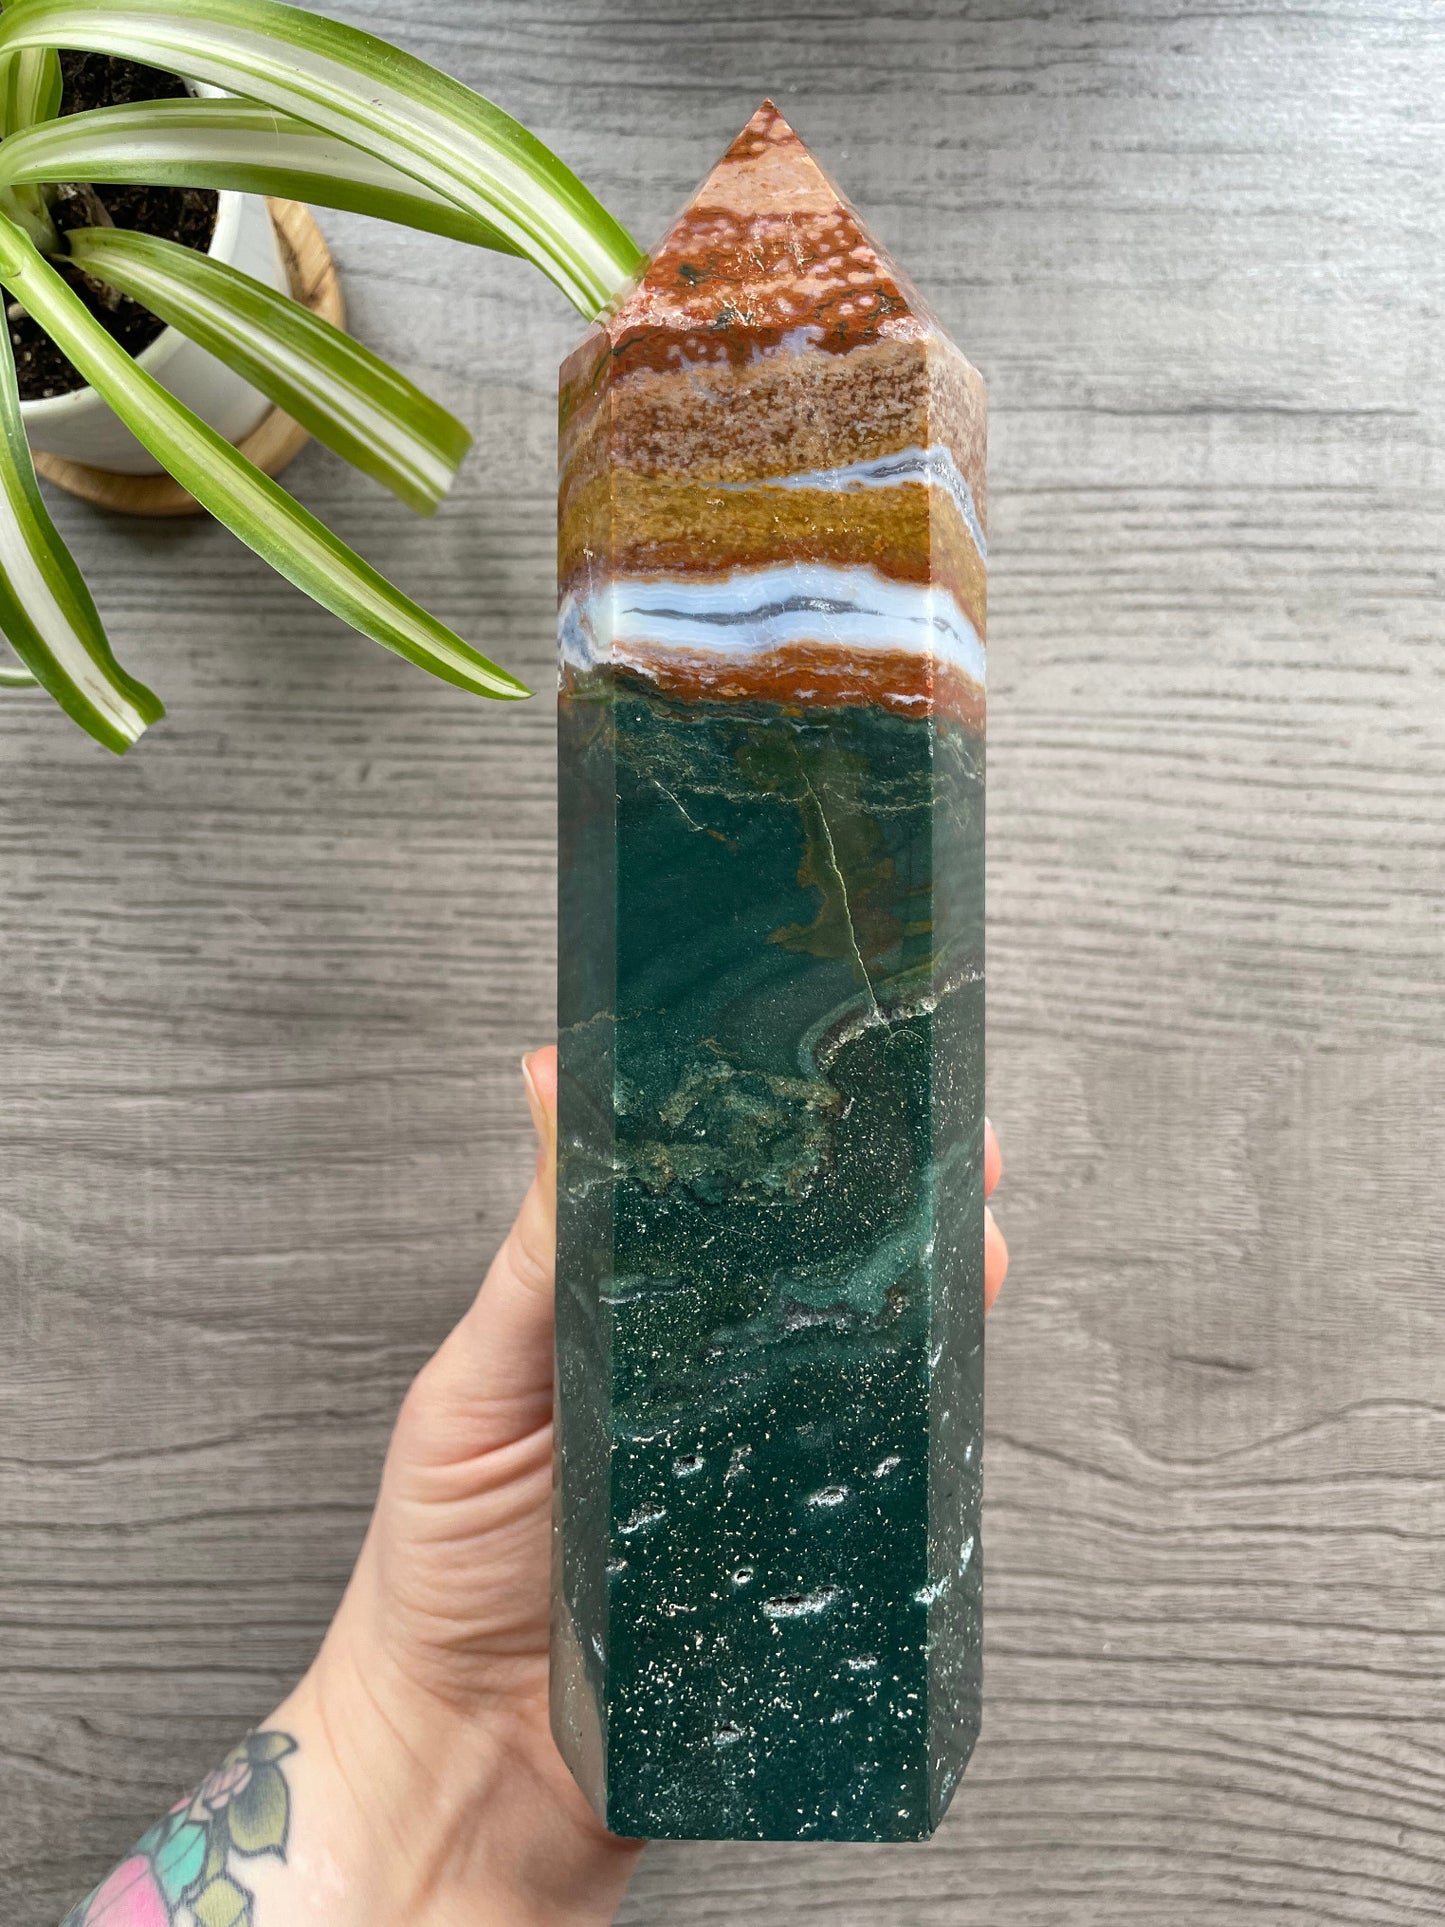 Pictured is a tower carved out of ocean jasper / river jasper.